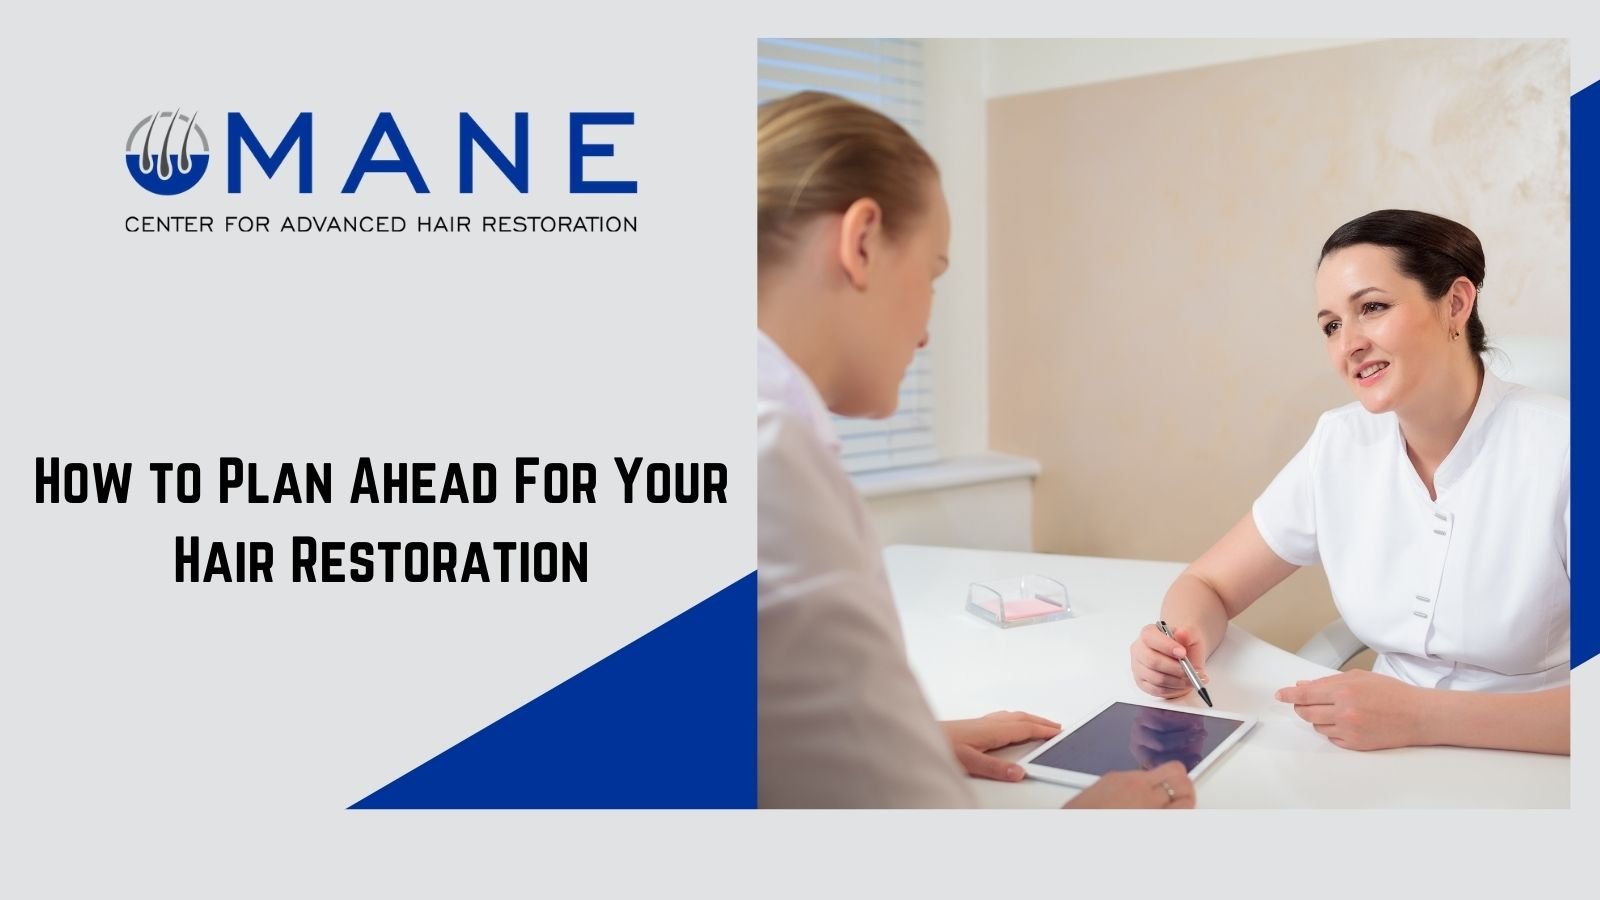 How to Plan Ahead For Your Hair Restoration